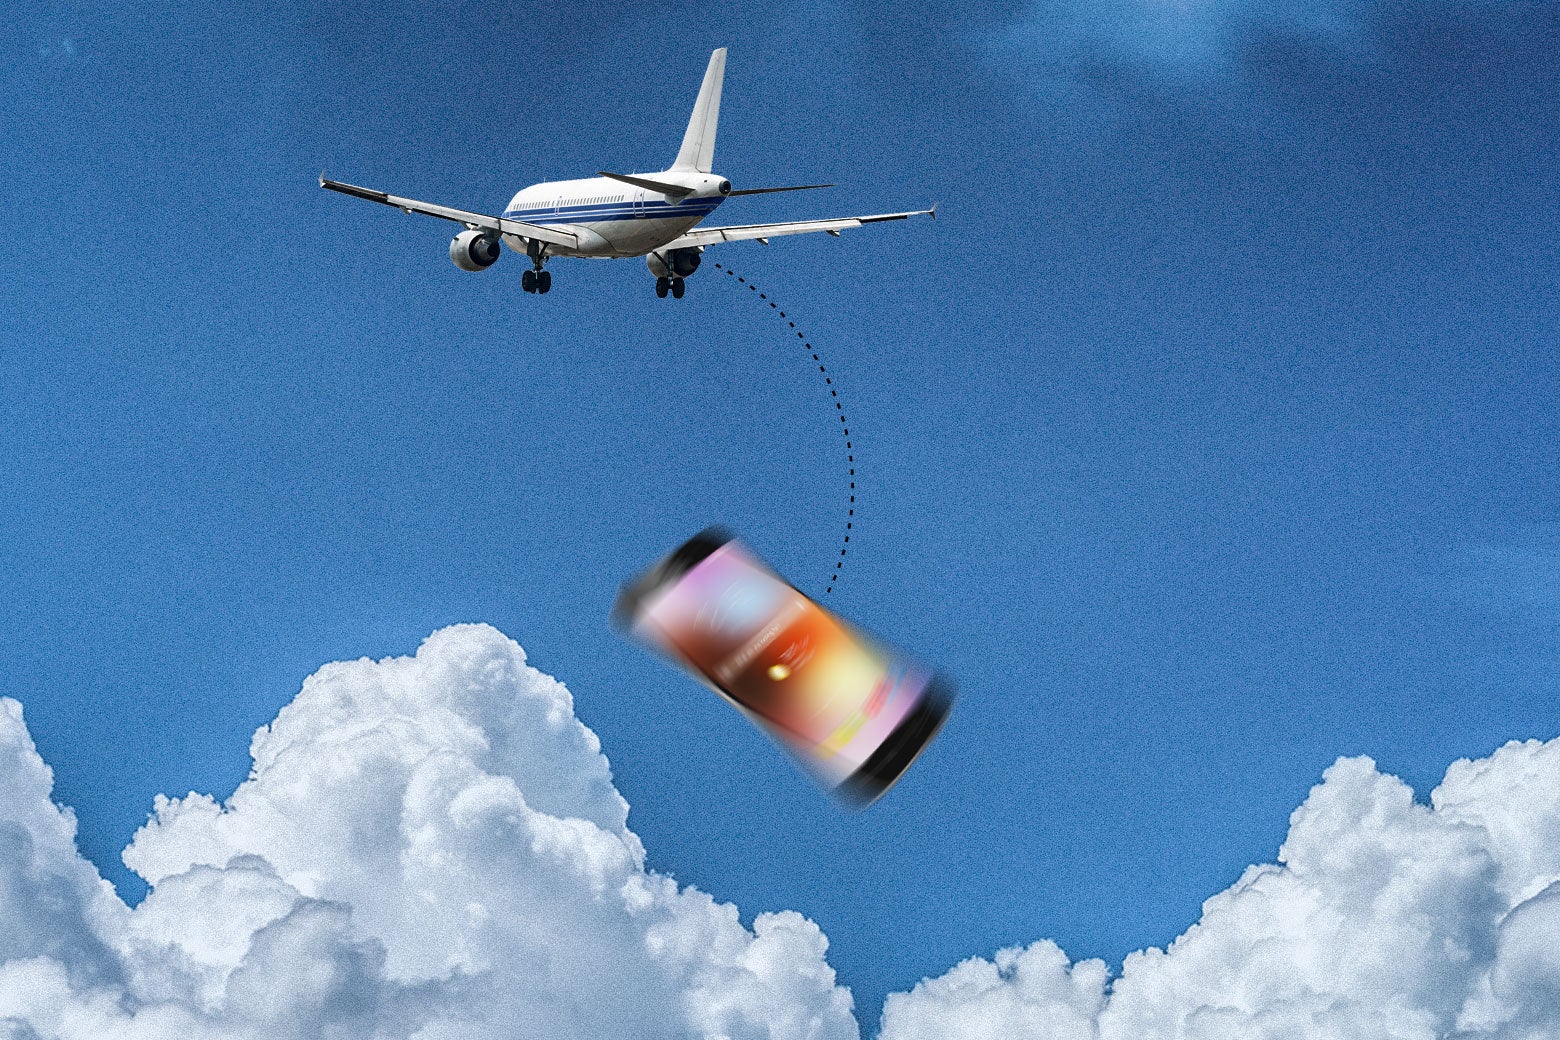 An iPhone falls out of a commercial plane midflight, through the clouds.